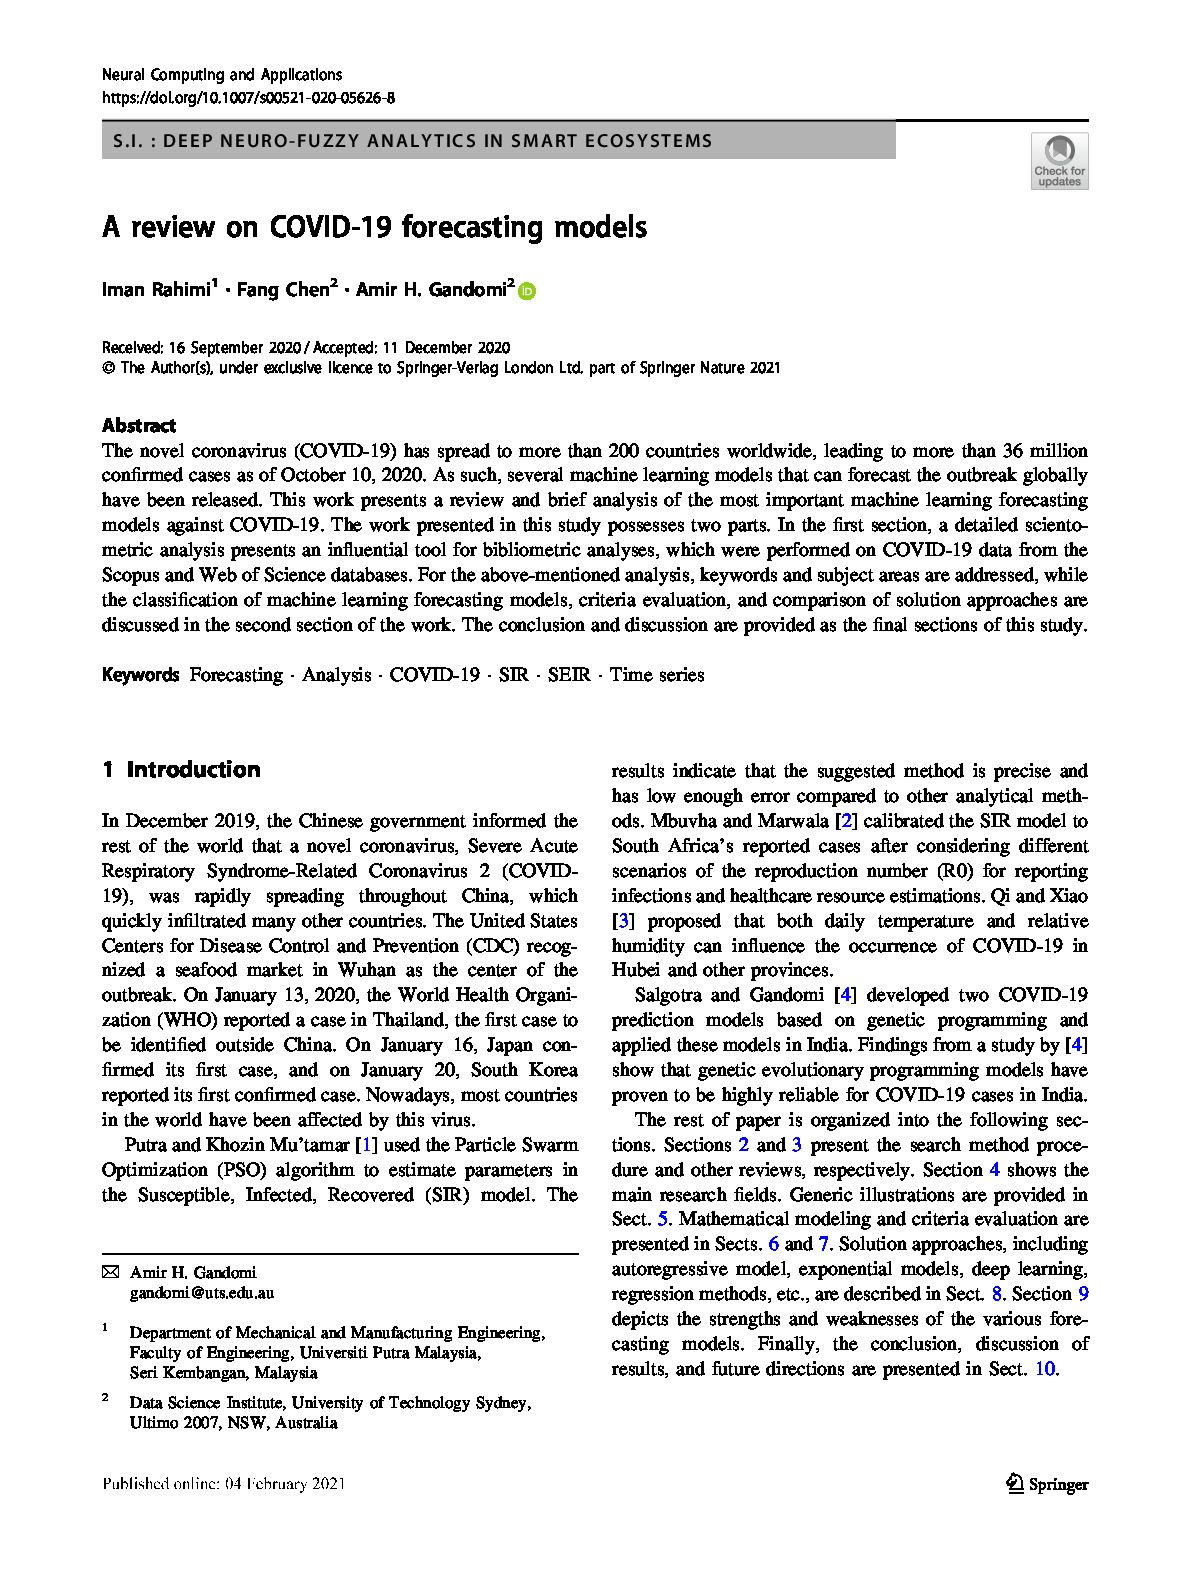 A review on COVID-19 forecasting models – 521_2020_Article_5626